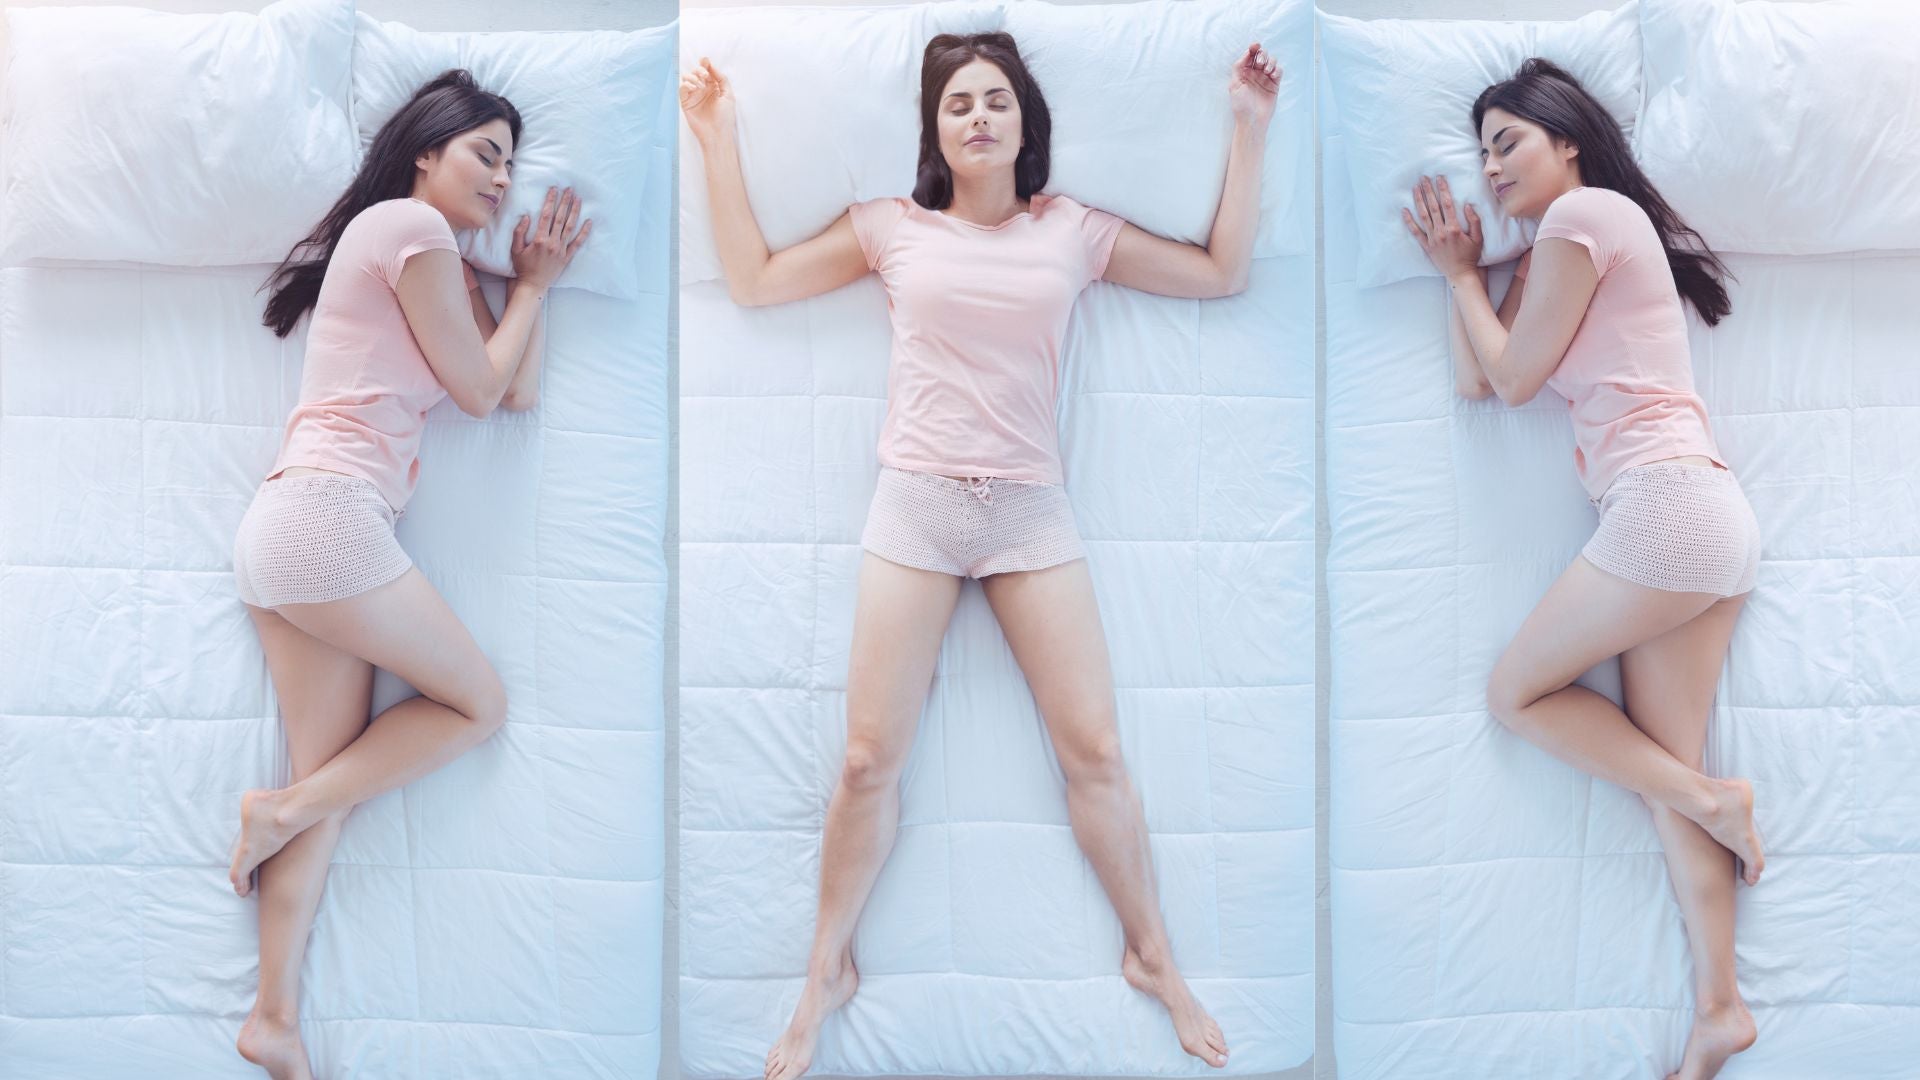 Is Your Sleep Position Hurting Your Health? Answers for Optimal Rest from Mulberry Park Silks